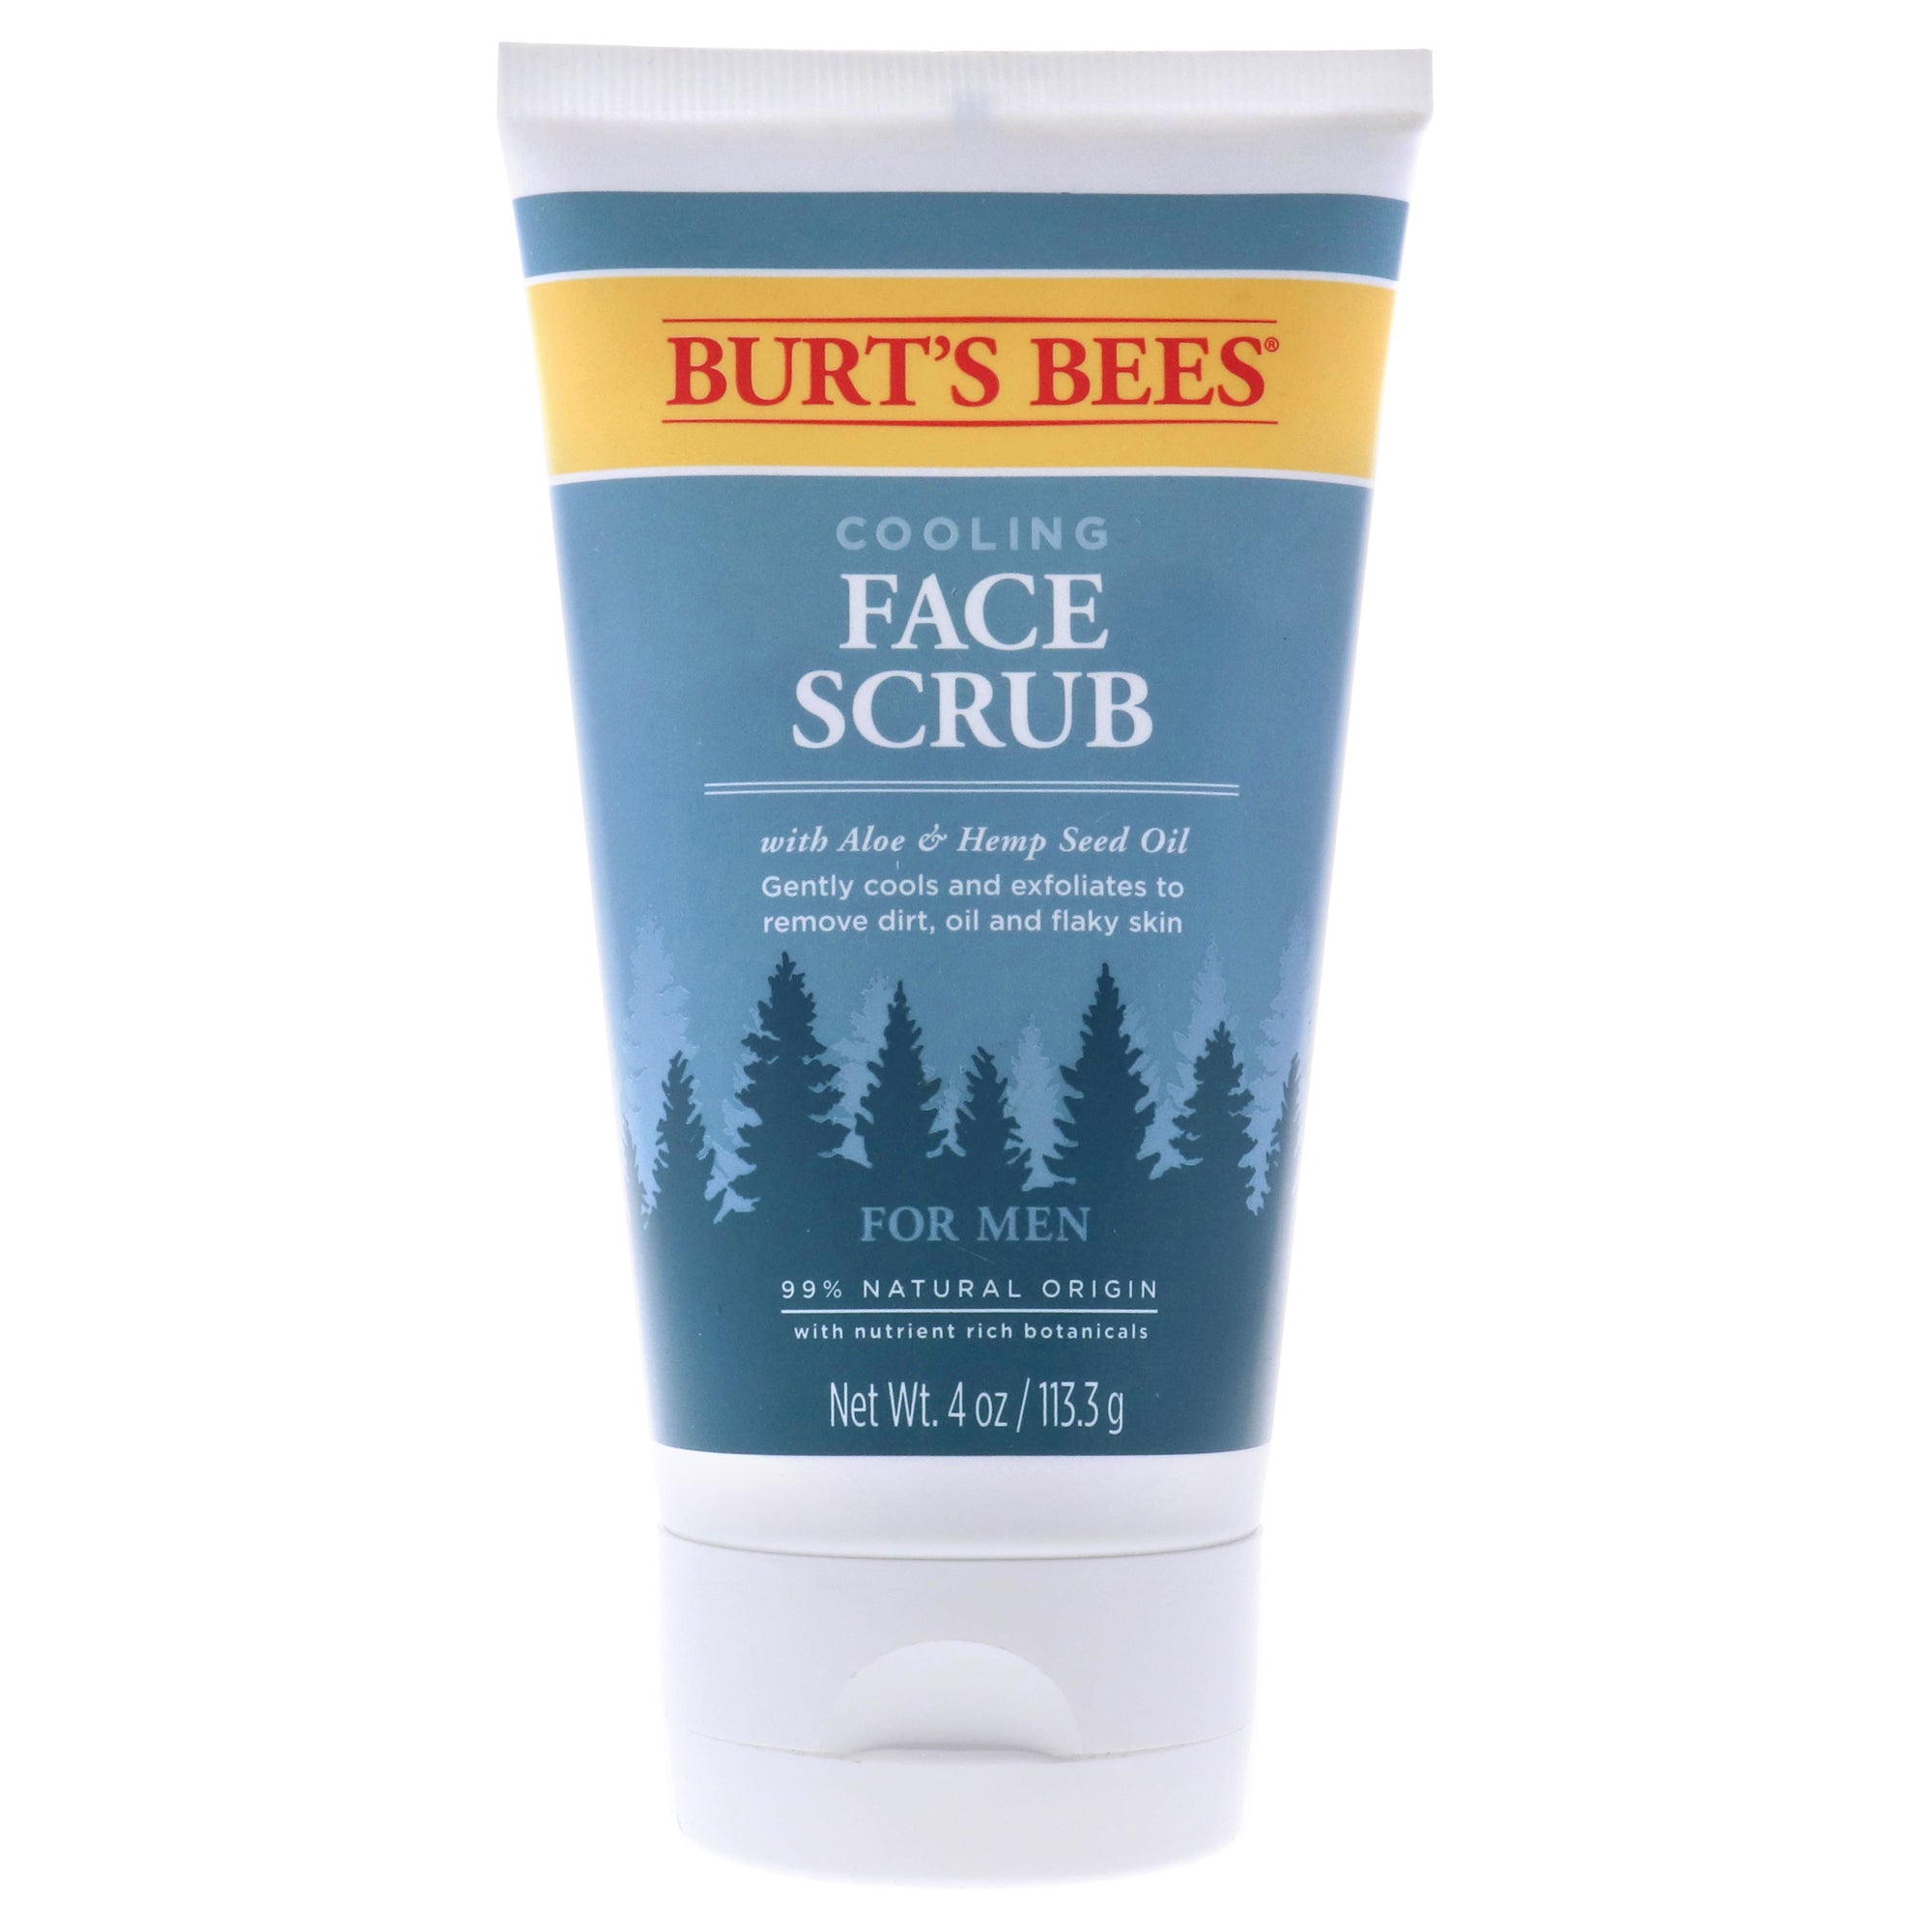 Cooling Face Scrub by Burts Bees for Men - 4 oz Scrub